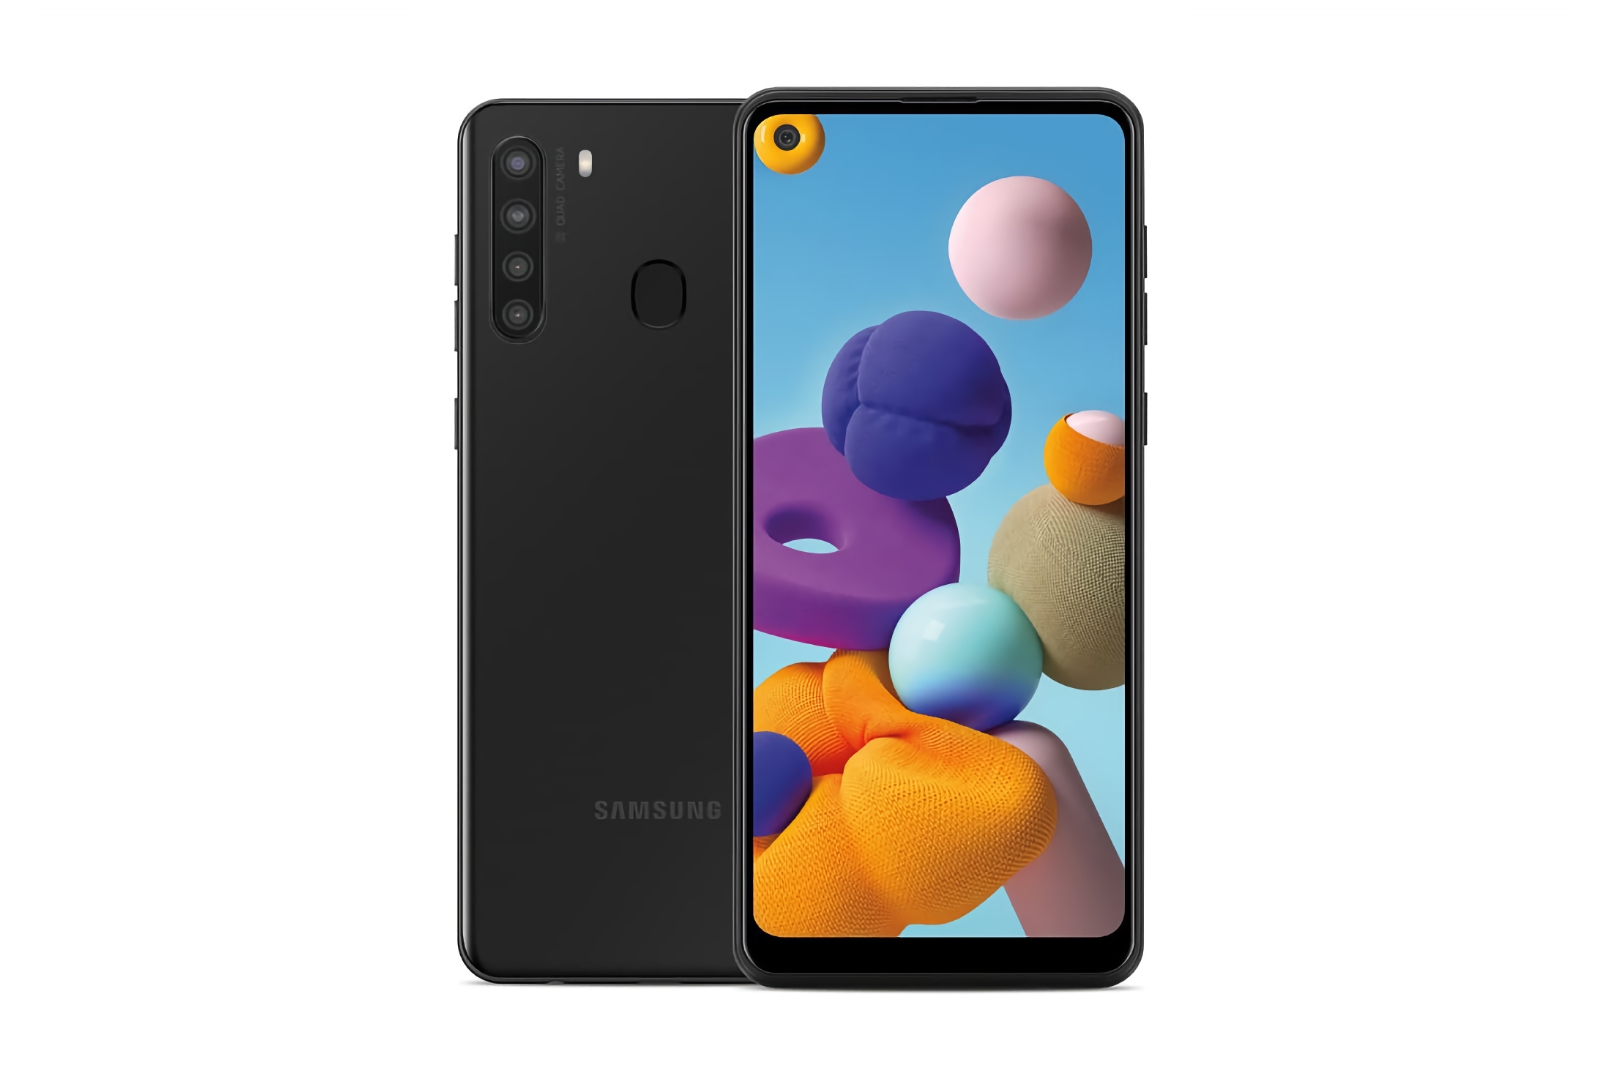 Samsung released Android 11 with One UI 3.1 shell for Galaxy A21 budget phone